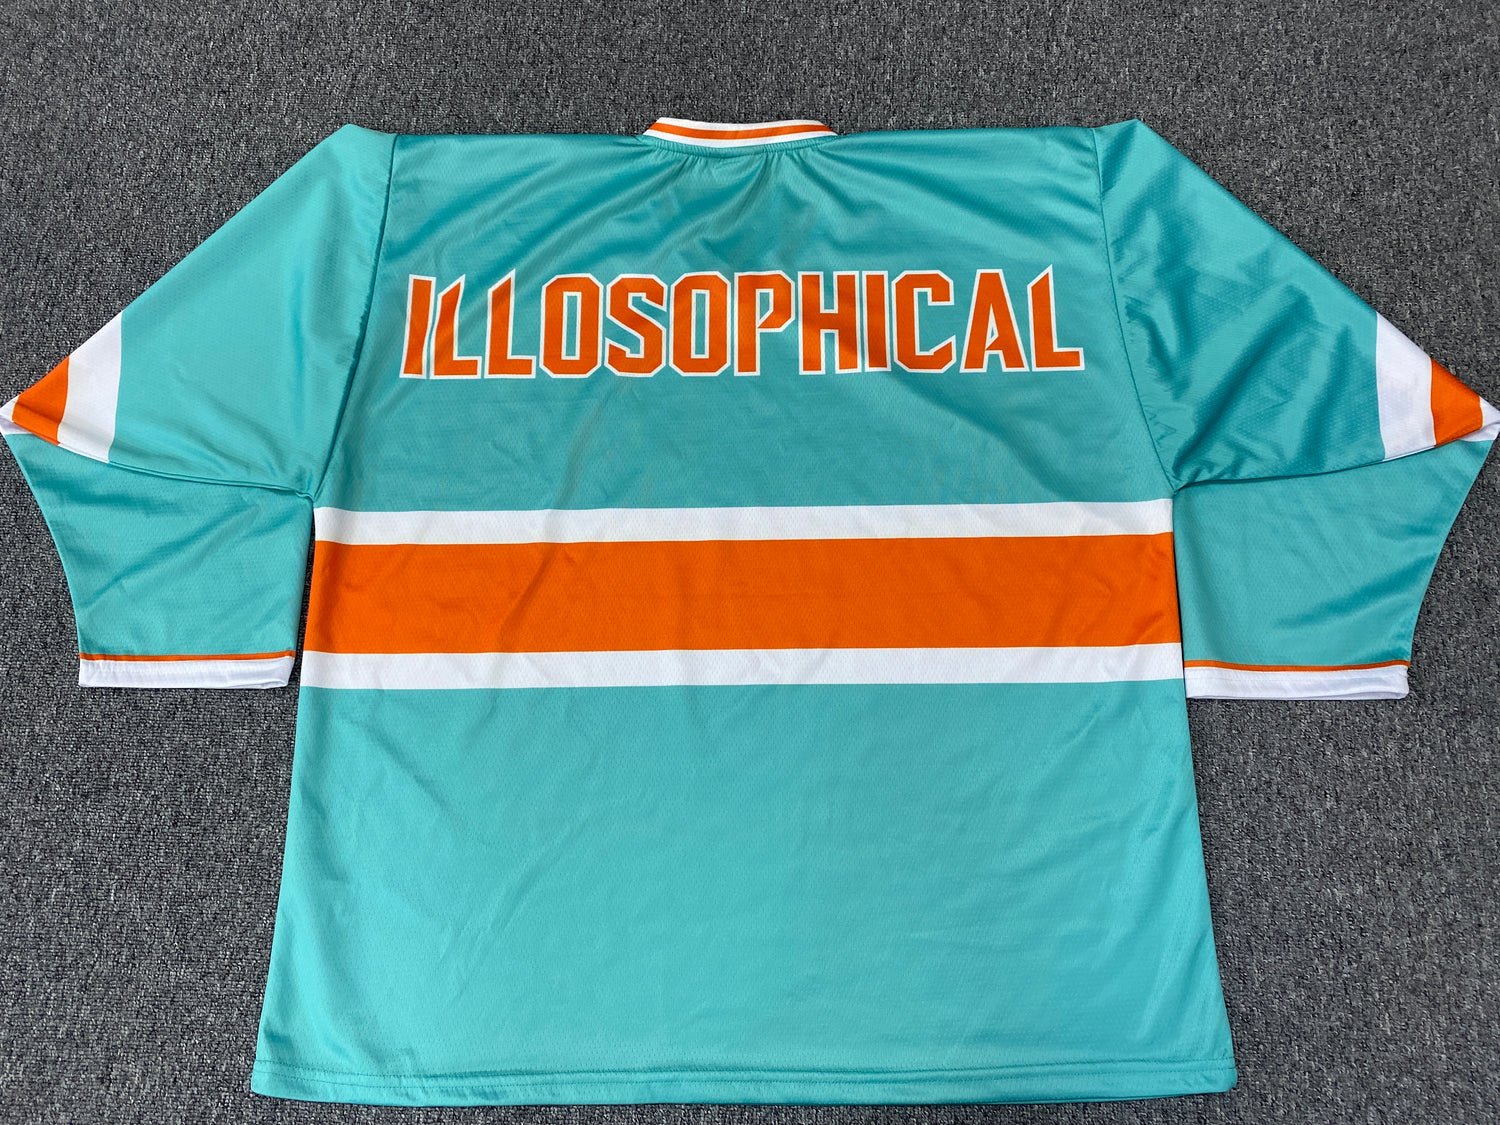 Xtra Sized - Limited Edition Hockey Jersey - Super Baggy (Costello Ill